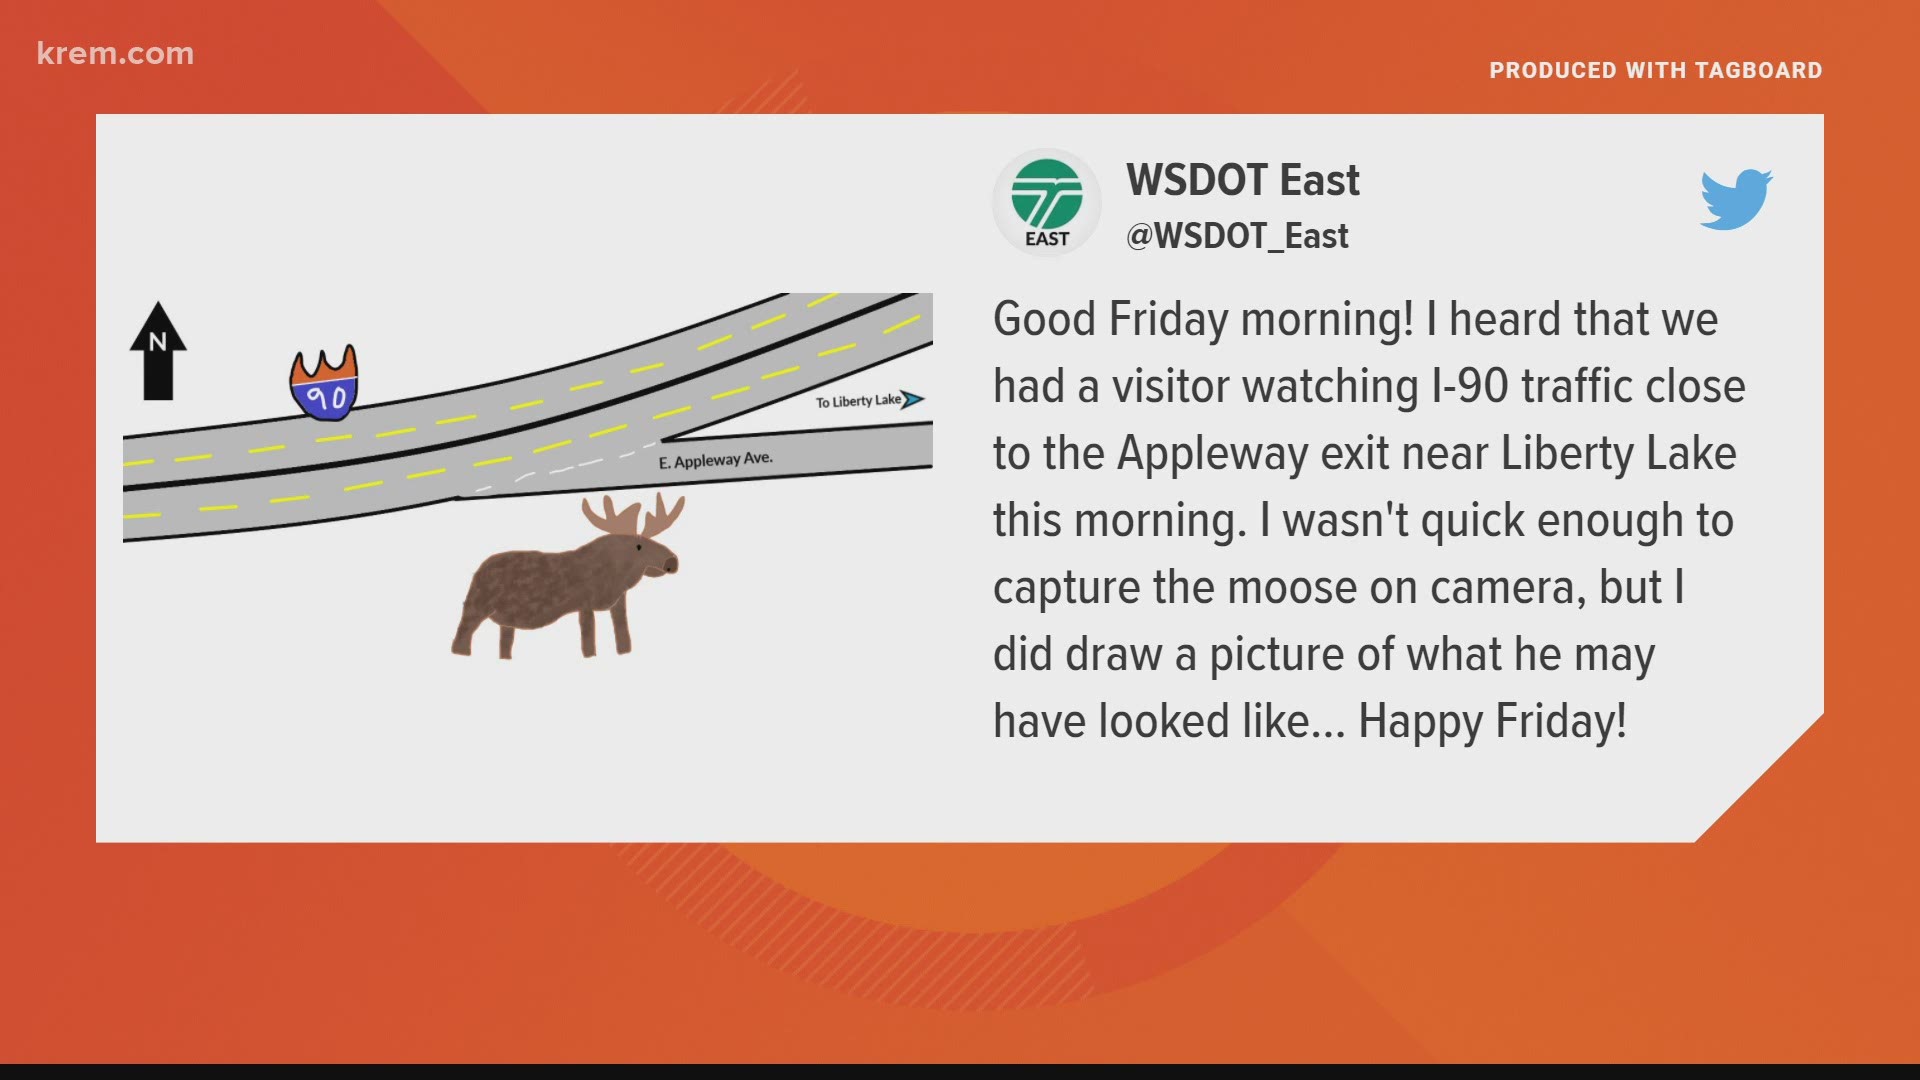 WSDOT announced the lanes have been cleared on I-90 after the moose sighting.